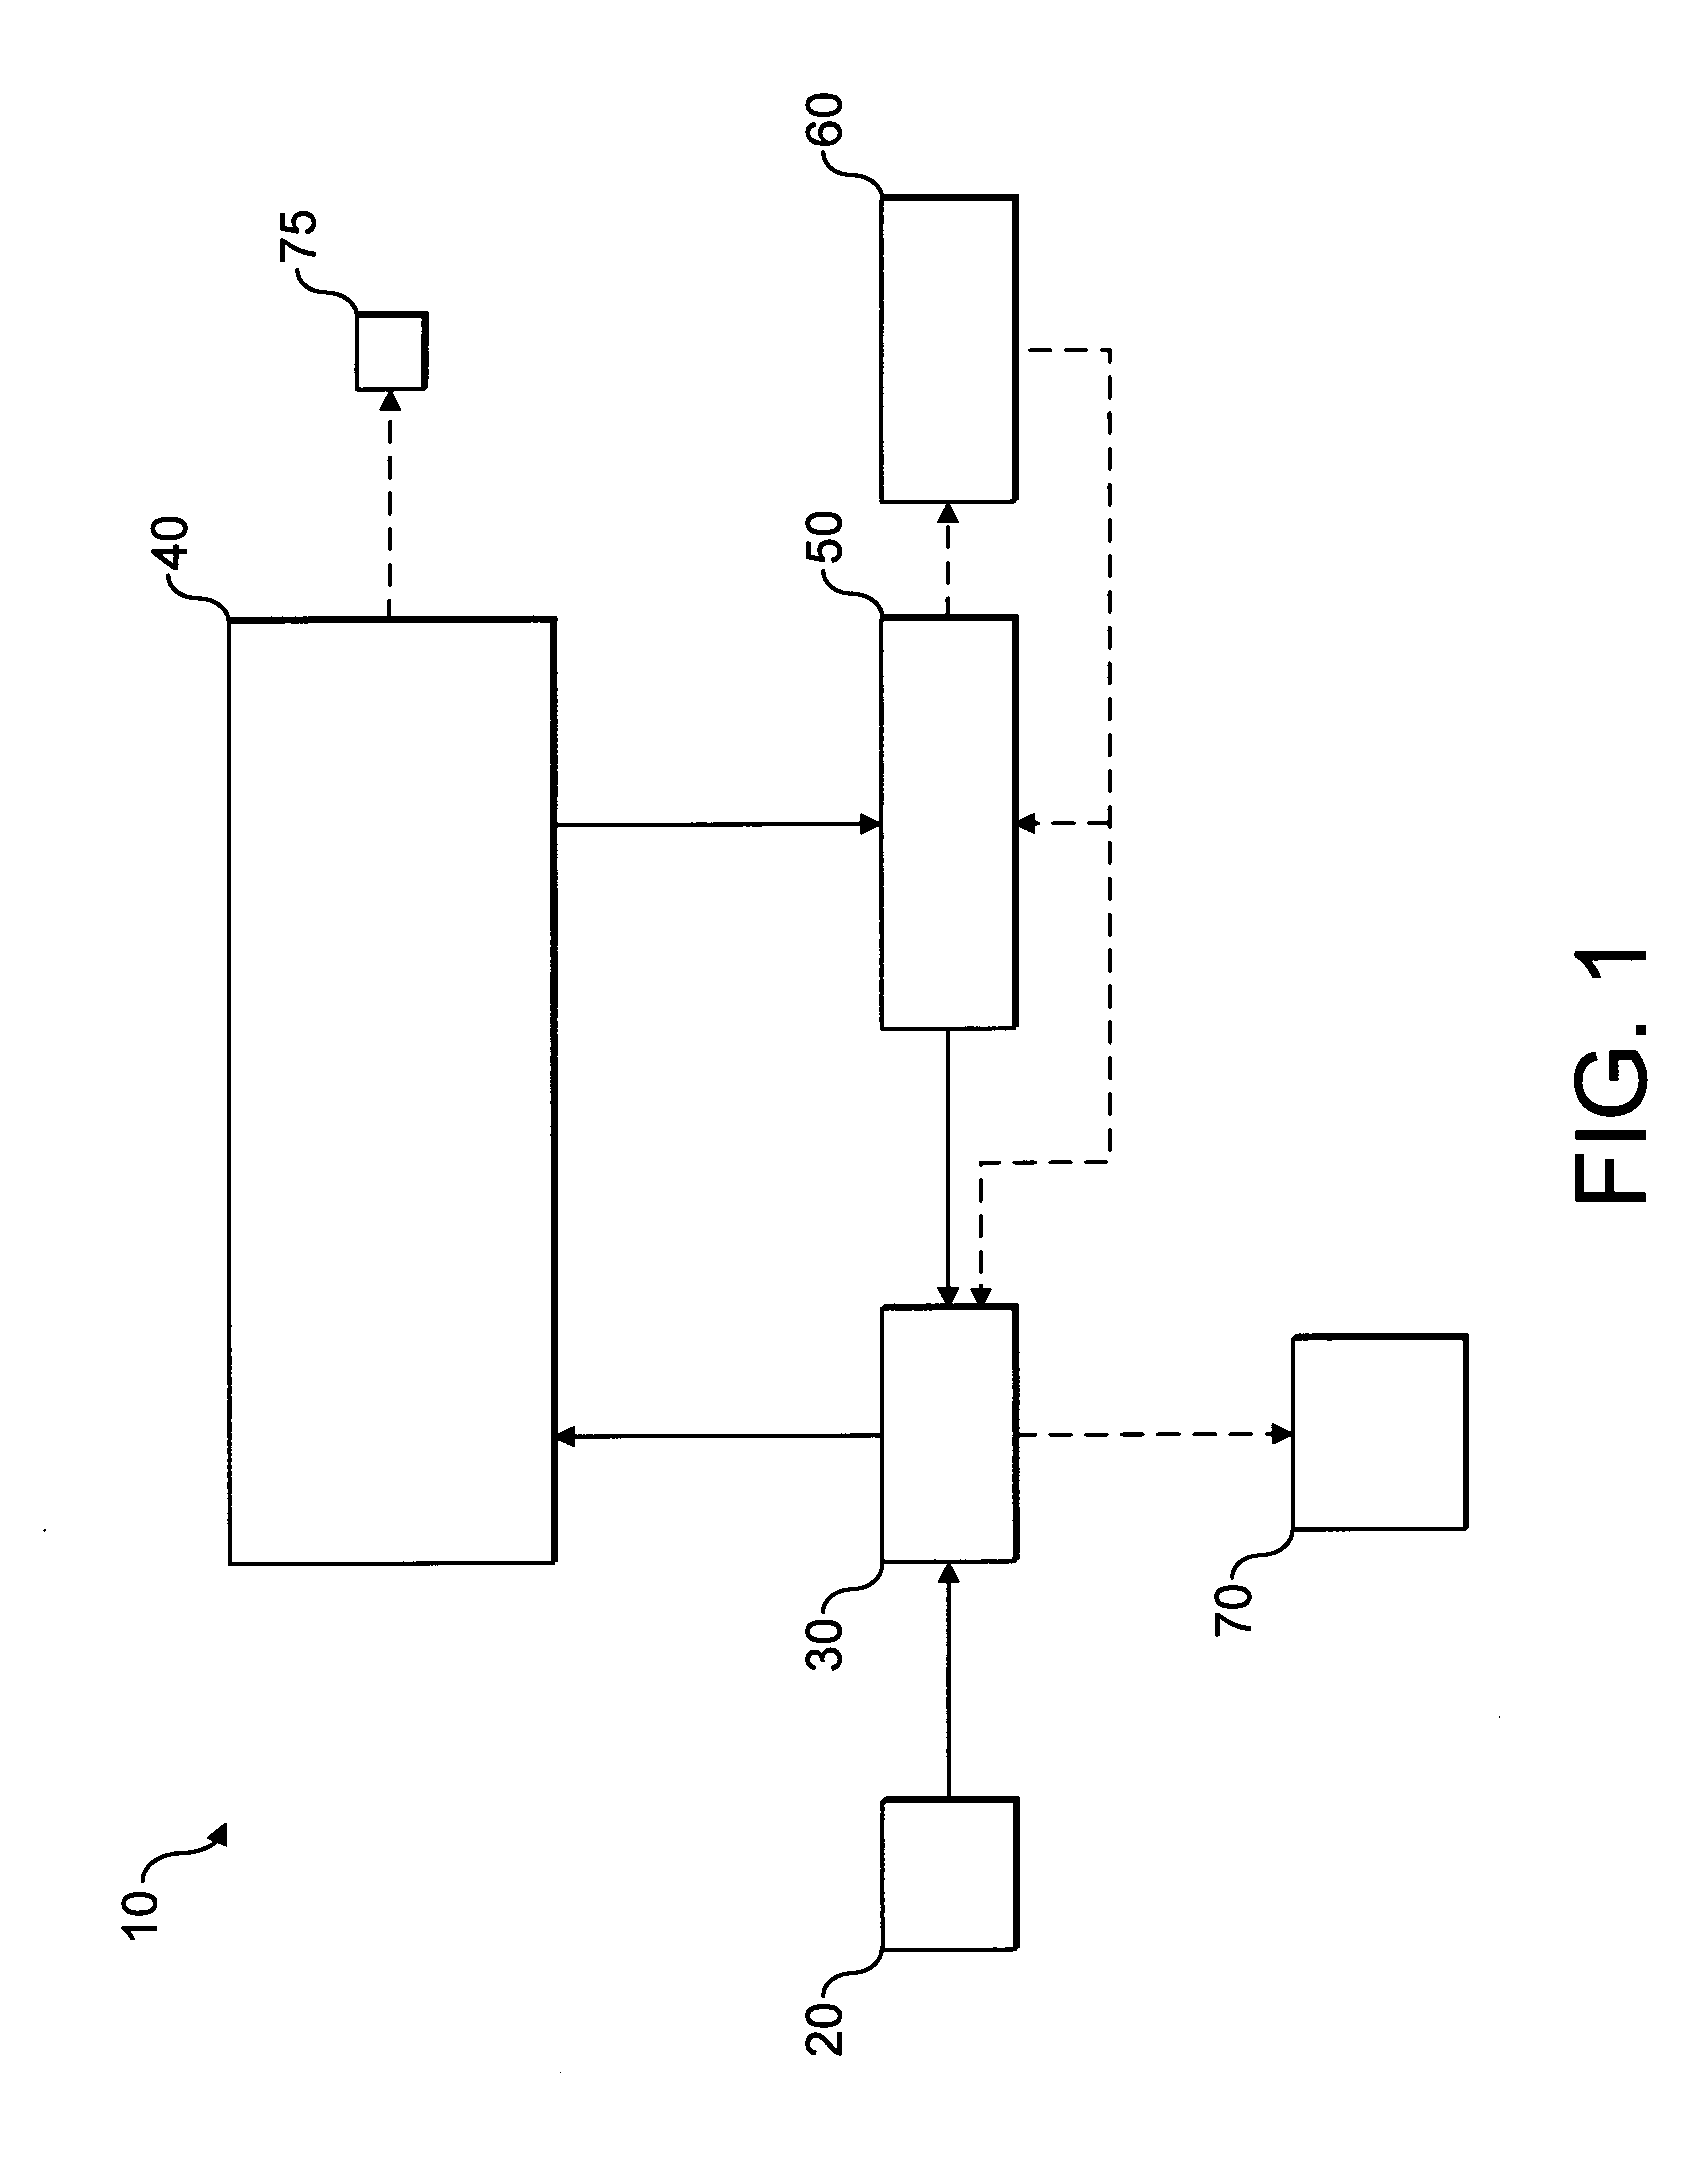 Mass spectrometer arrangement with fragmentation cell and ion selection device